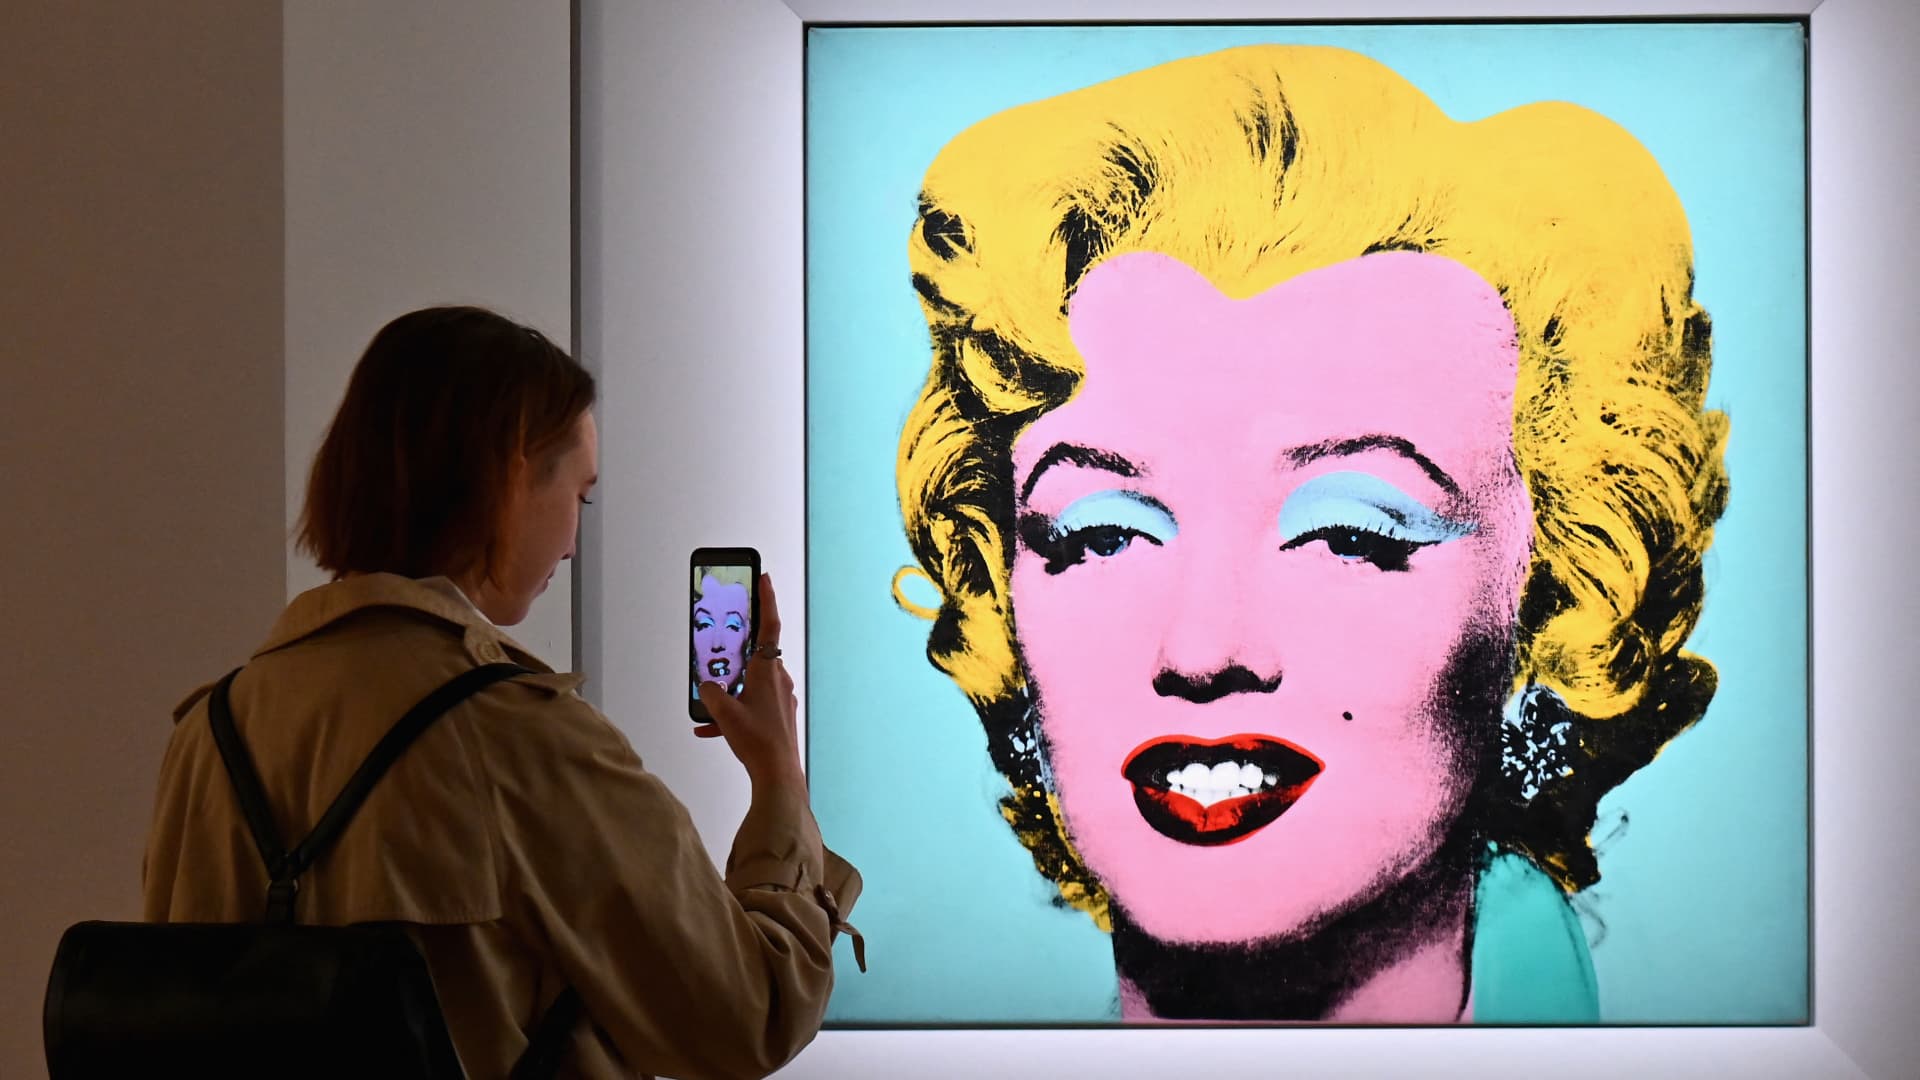 Andy Warhol's 'Marilyn' sells for $195 million, setting record for American art